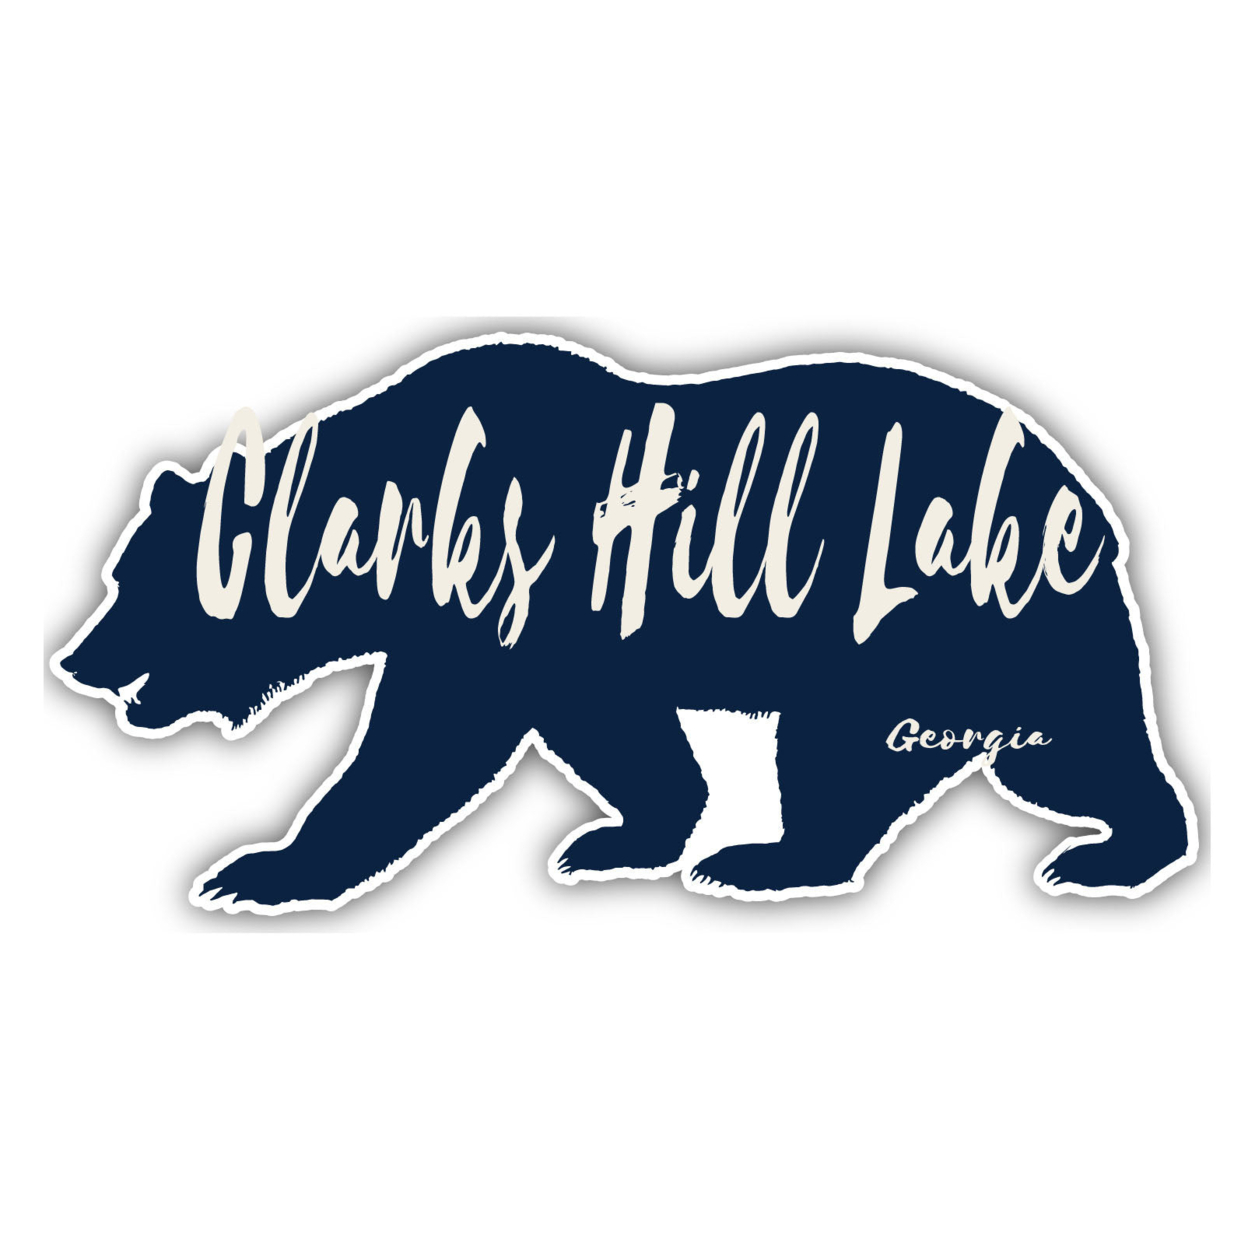 Clarks Hill Lake Georgia Souvenir Decorative Stickers (Choose Theme And Size) - 4-Pack, 12-Inch, Camp Life